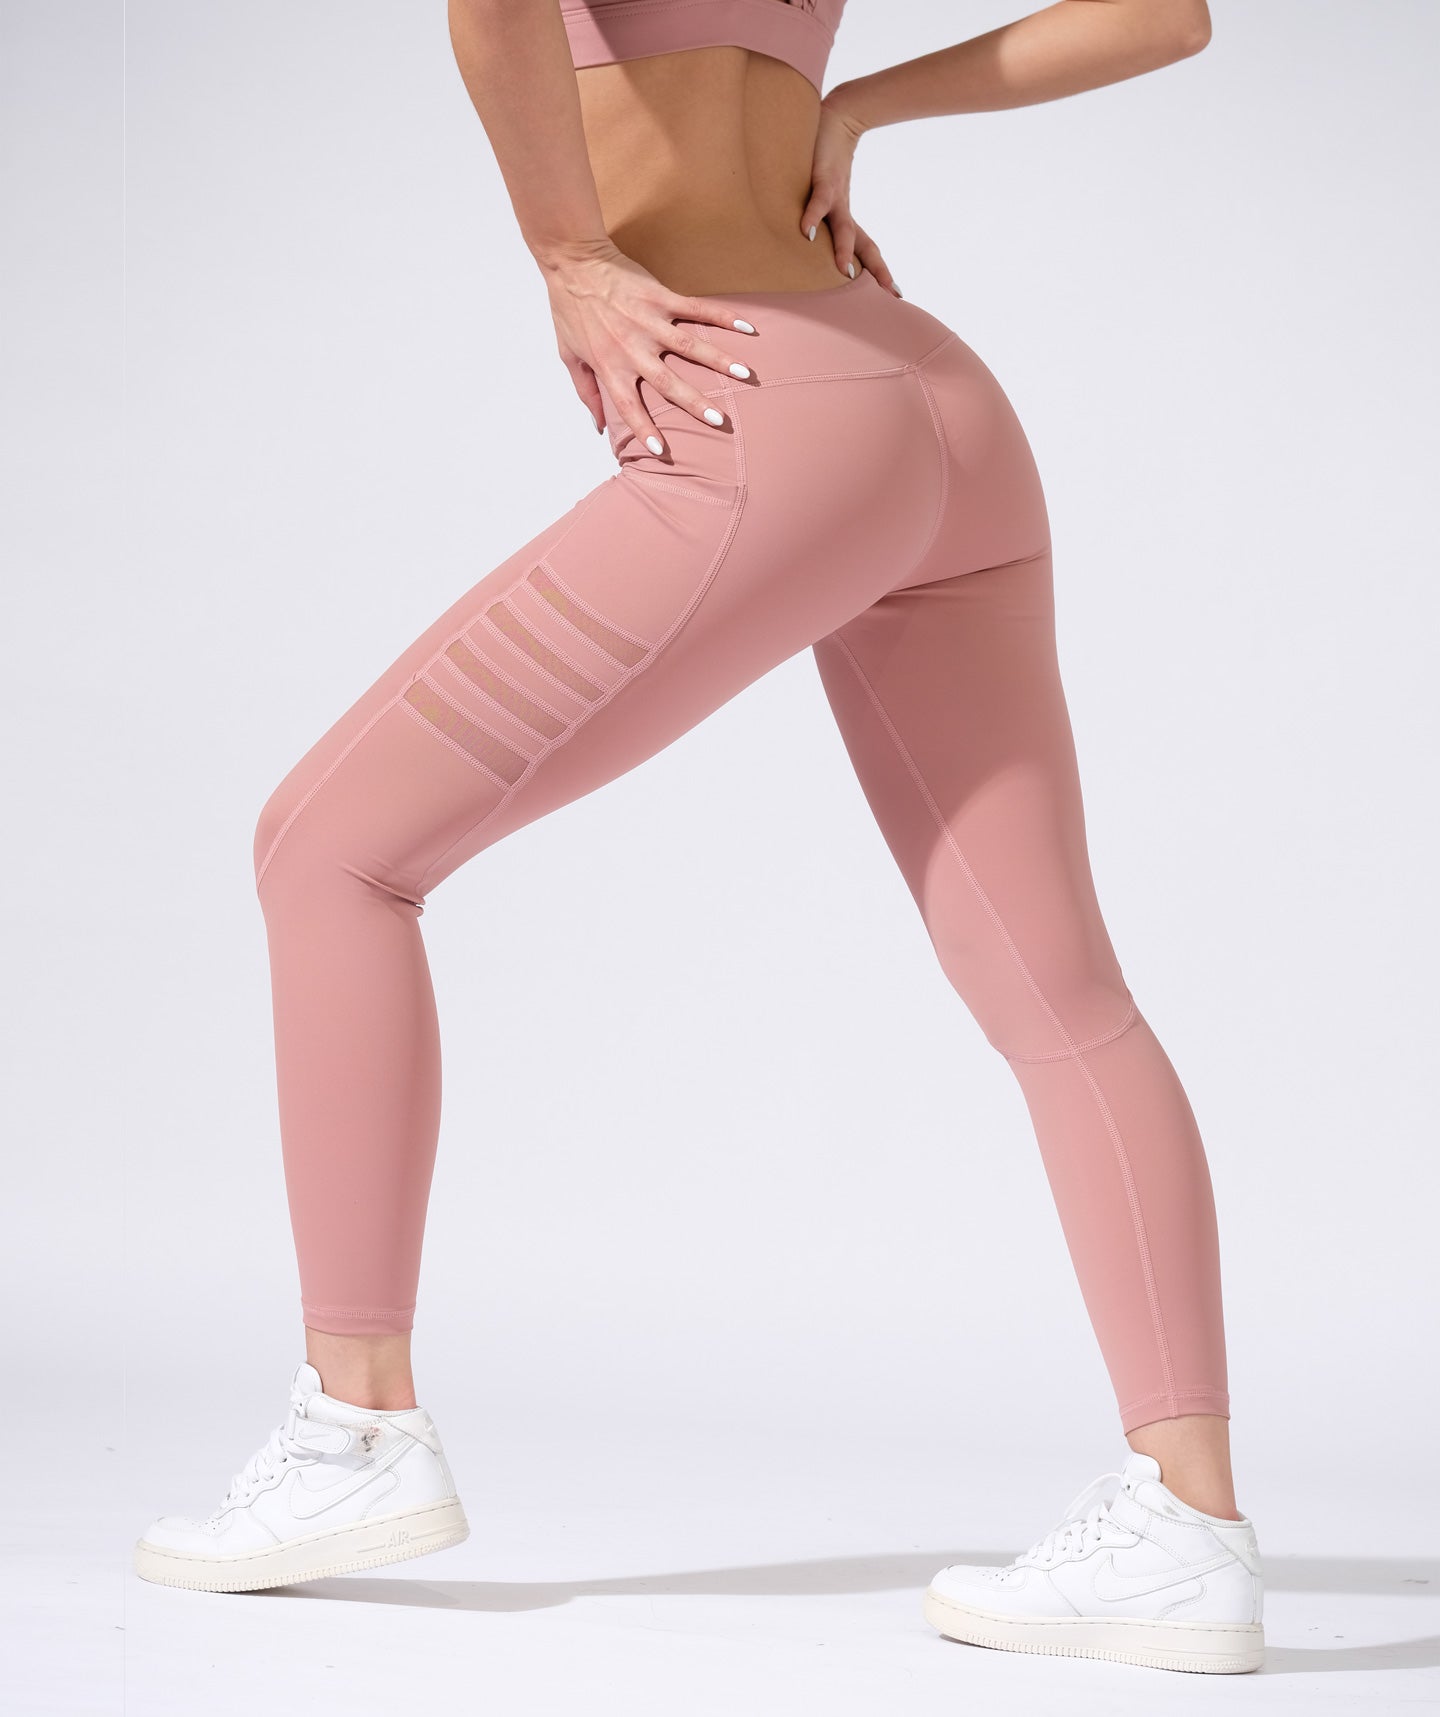 TechFit Leggings with Transparent Mesh and Side Pockets in Pink